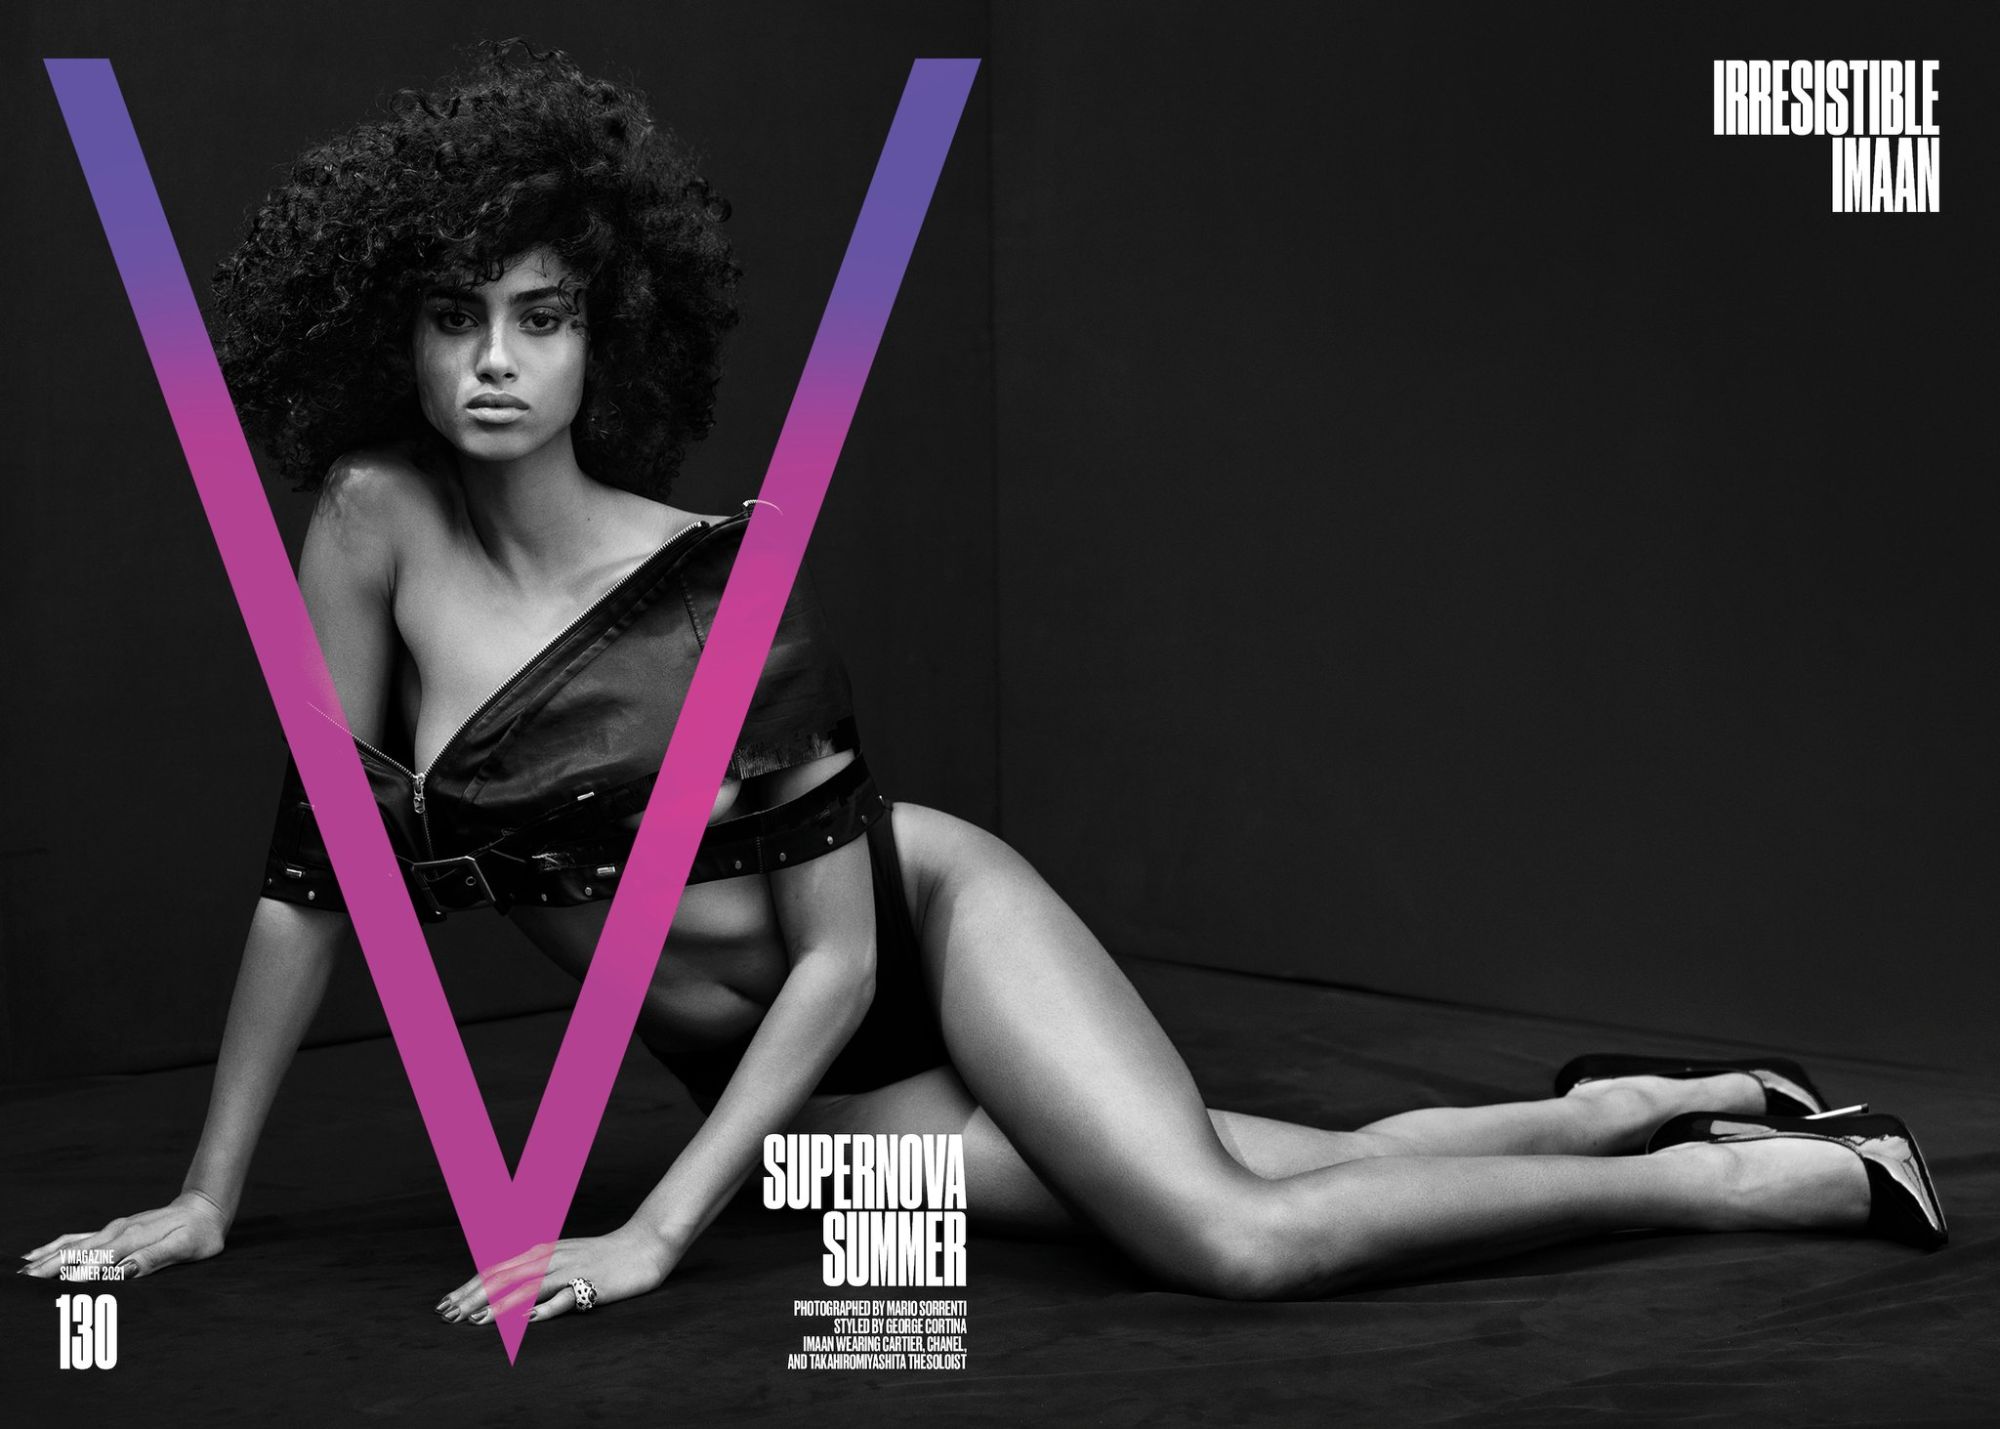 Imaan Hammam Covers V Magazine Summer 2021. Clothing & Jewelry: Top by Takahiromiyashita TheSoloist.; Bikini by Chanel; Shoes by Devious; Necklace, Ring by Cartier